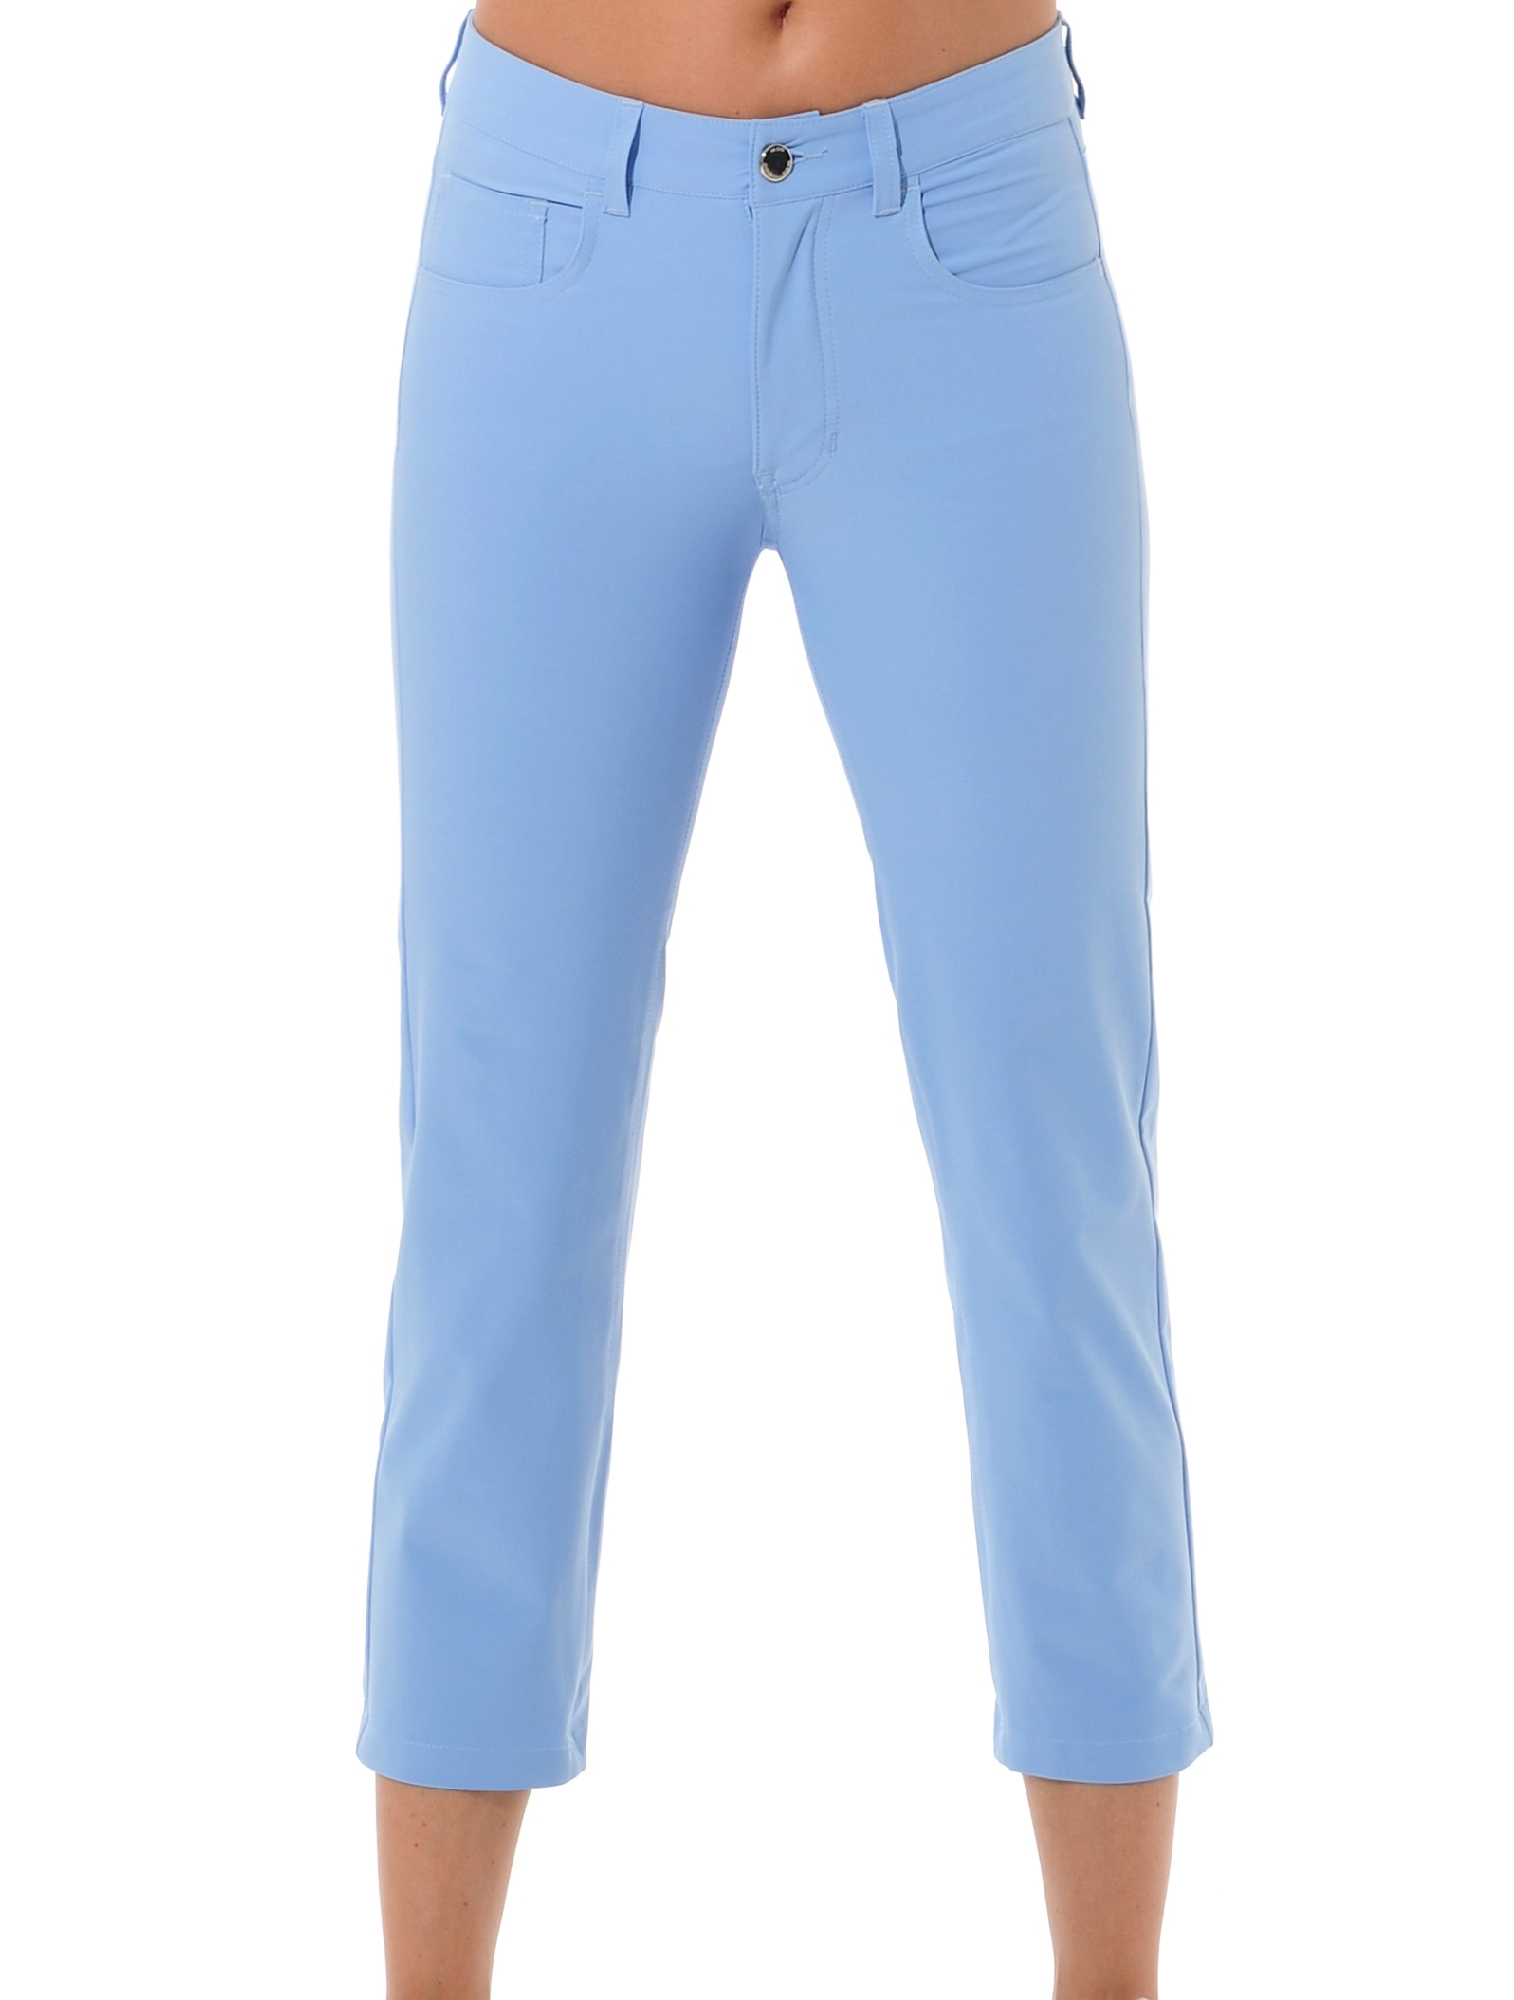 4way stretch cropped straight cut pants baby blue 